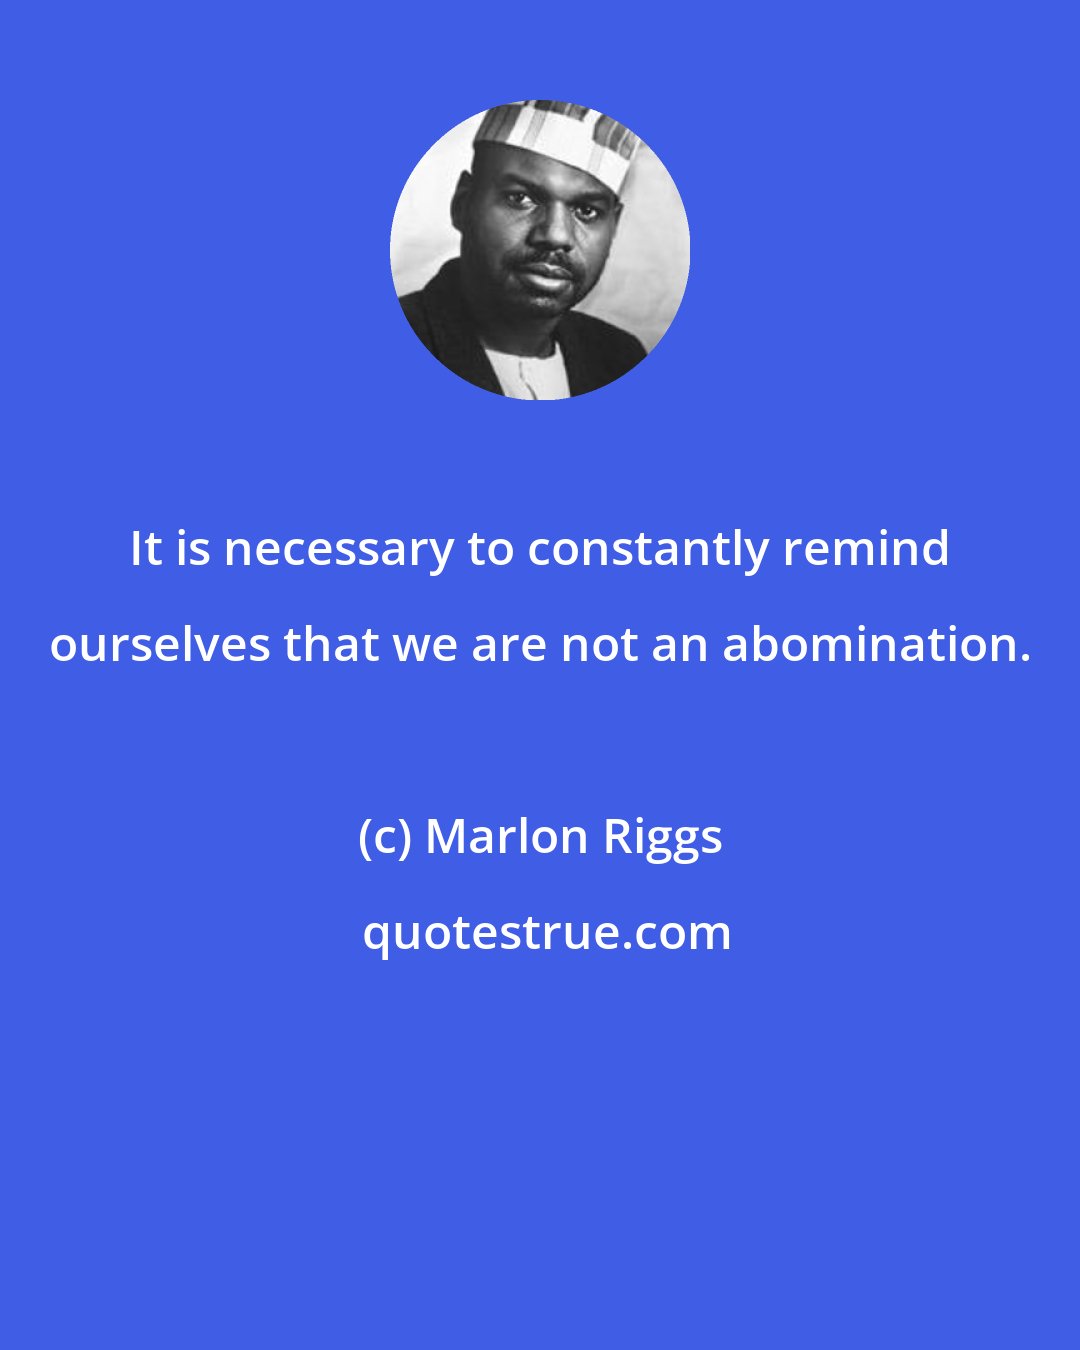 Marlon Riggs: It is necessary to constantly remind ourselves that we are not an abomination.